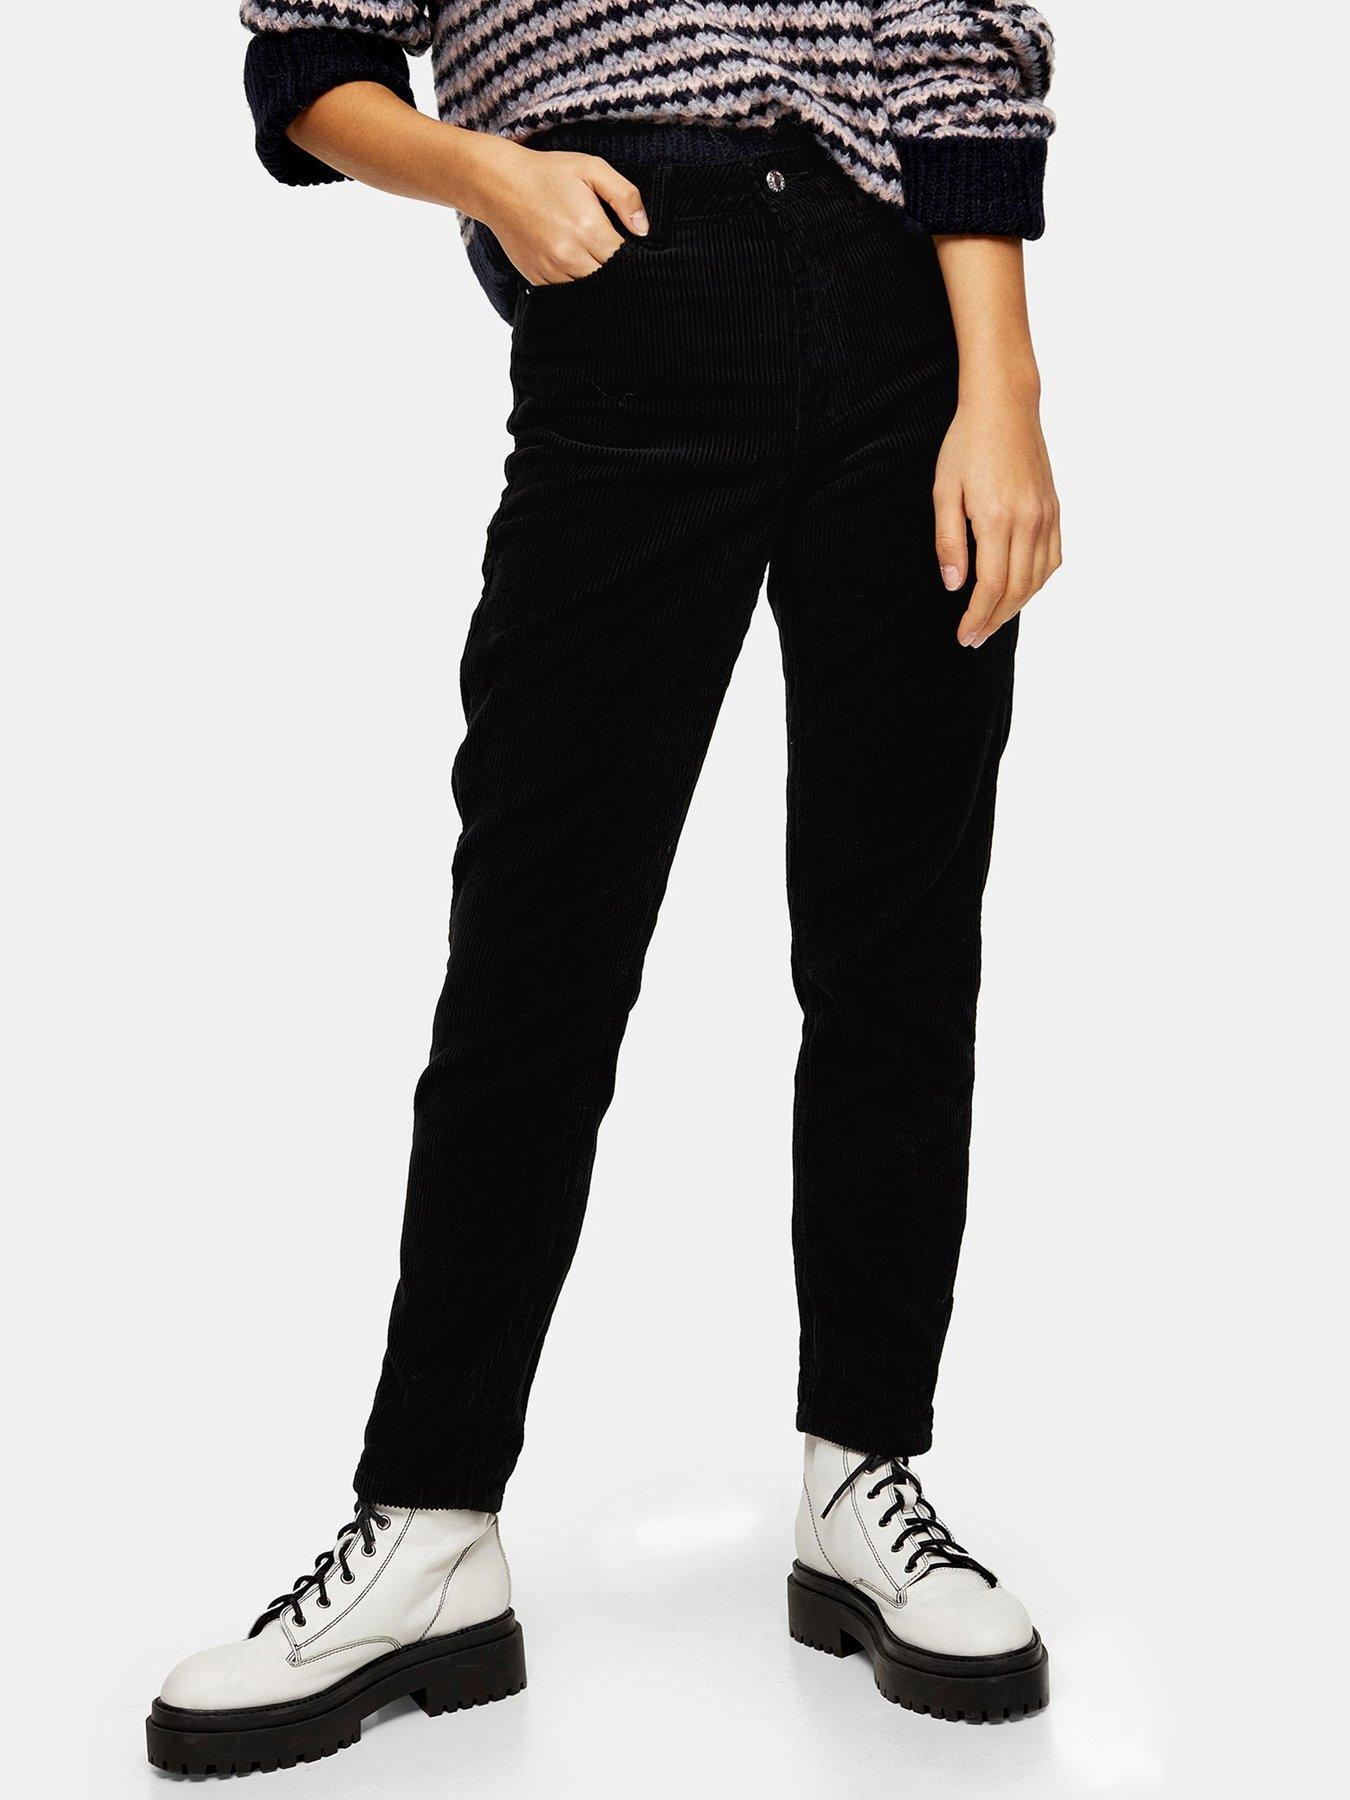 topshop cord jeans